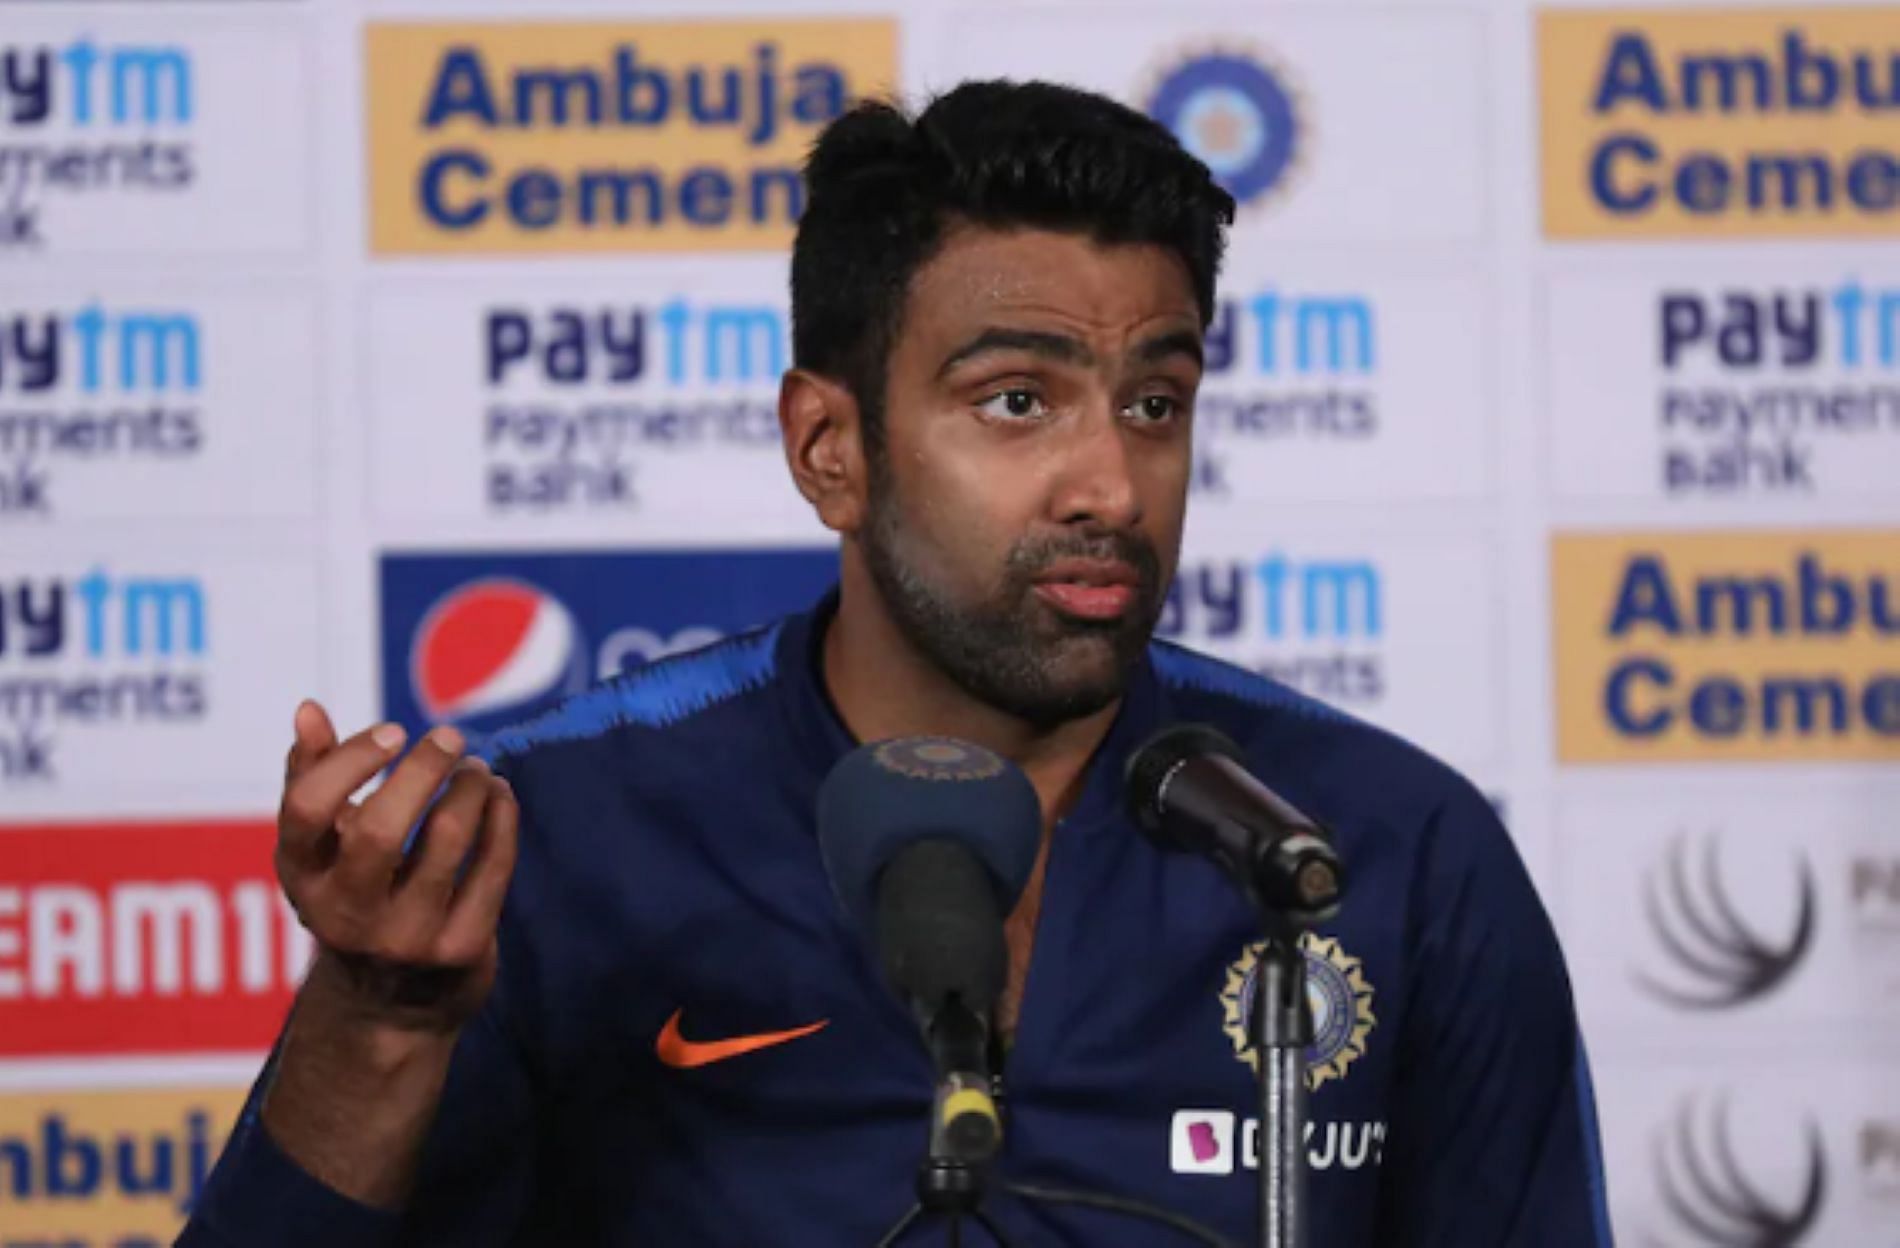 Ashwin had a go at the critics of the Indian side.